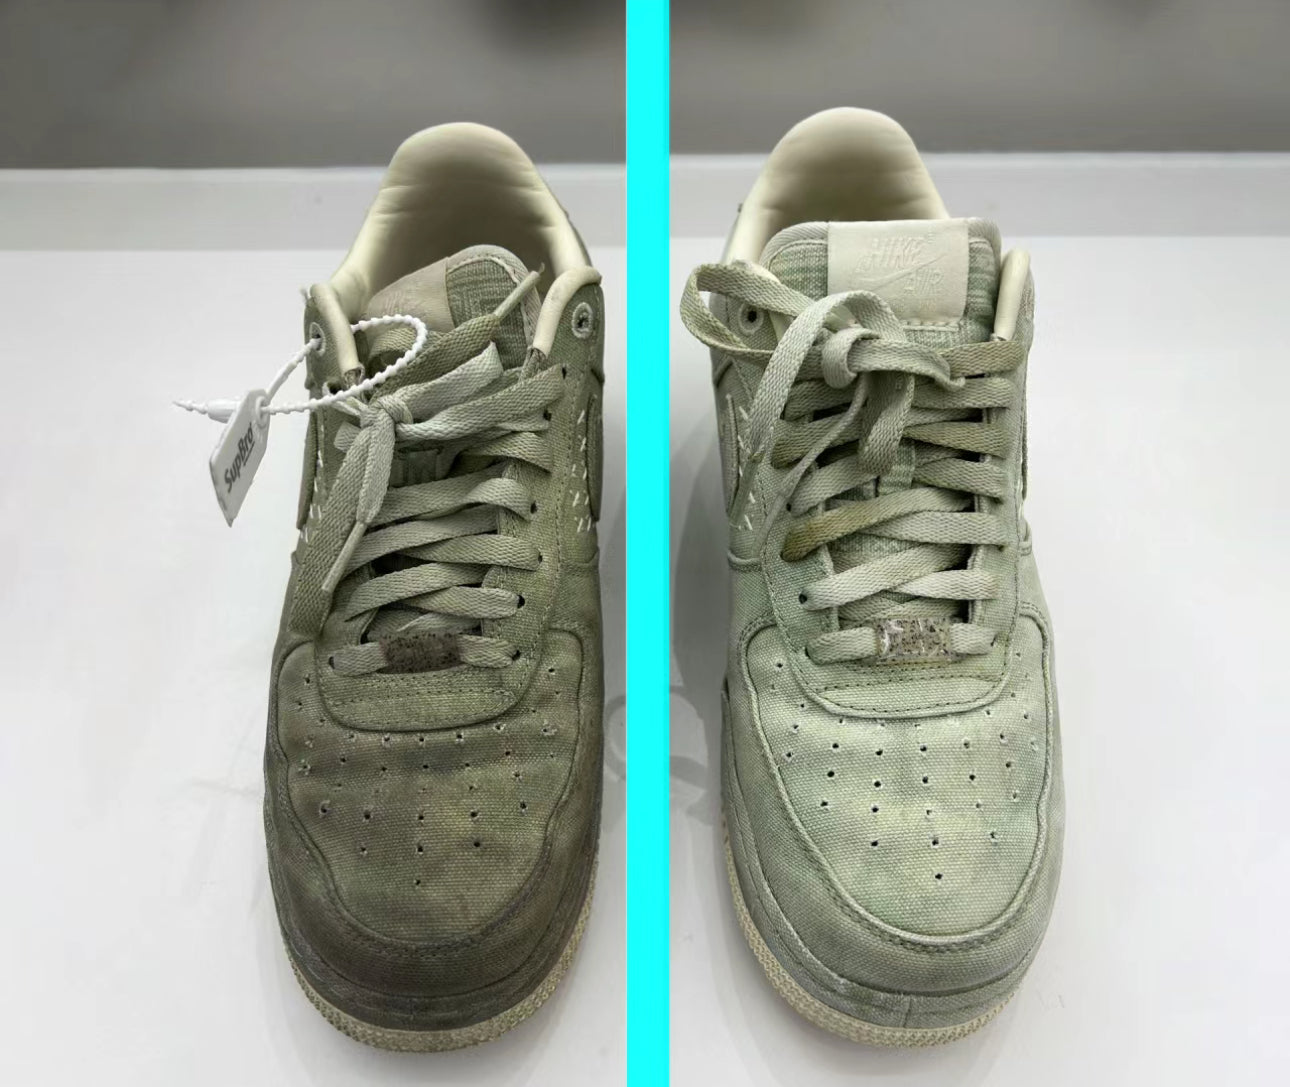 Advanced sneaker cleaning